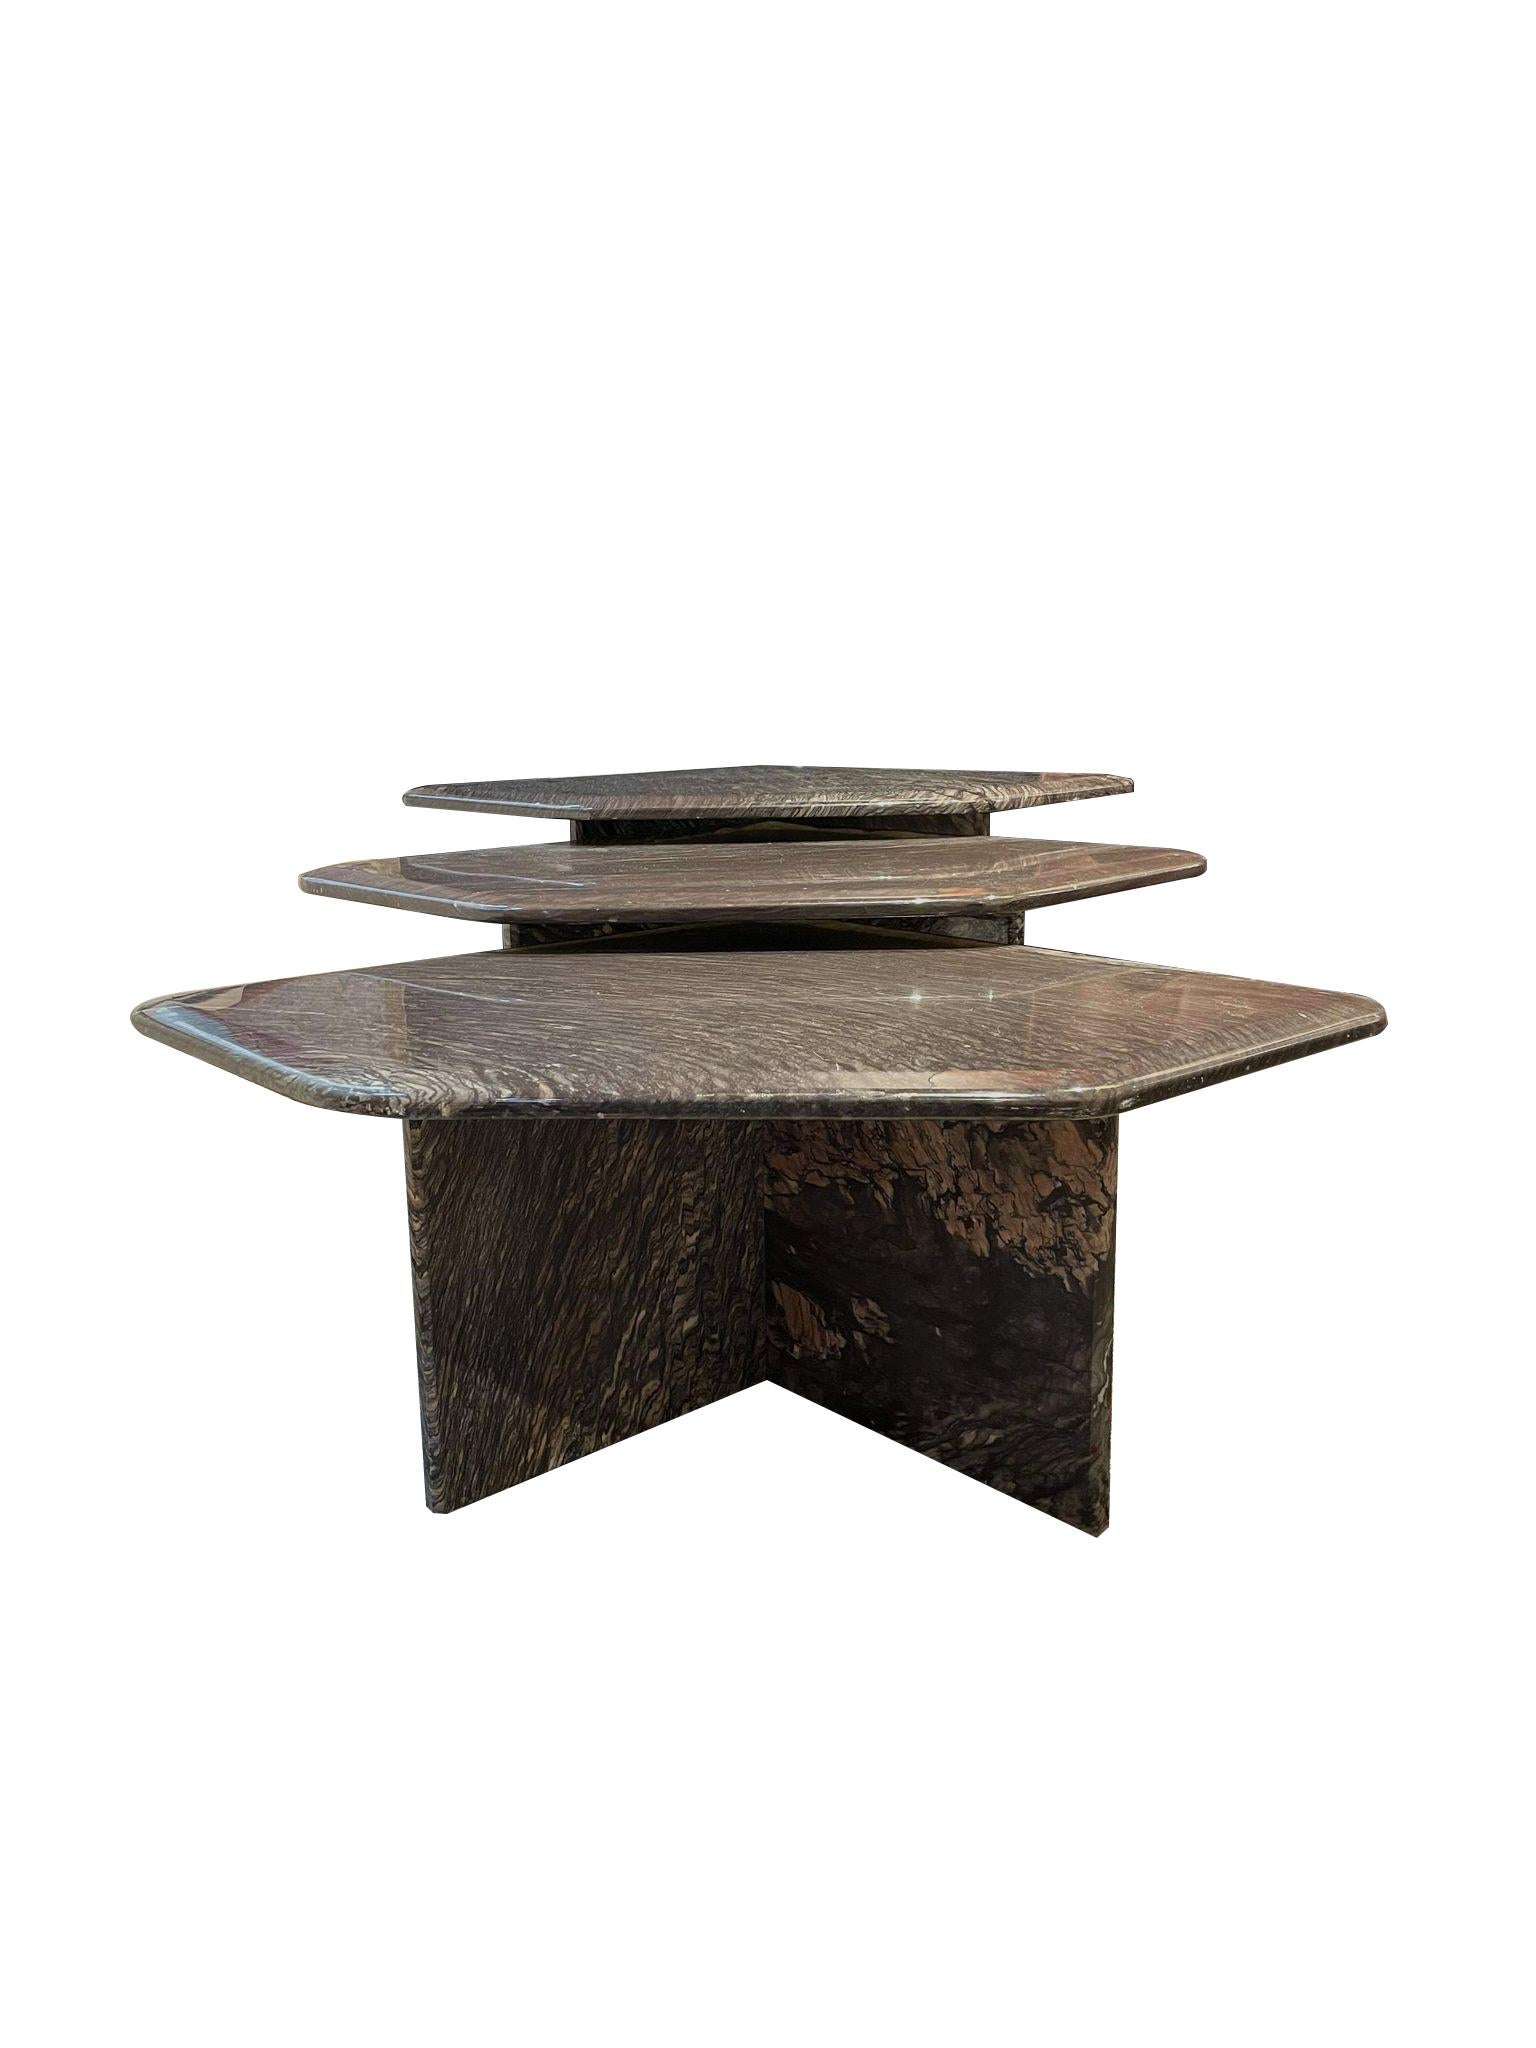 Graphic and Italian 1970's set of 3 nesting coffee tables in Cipolin marble with geometric top and cut angle with triangular pedestal bases. 
The 3 tables have tops of 74 x 58cm and have a height of: 32, 36 and 40 cm.